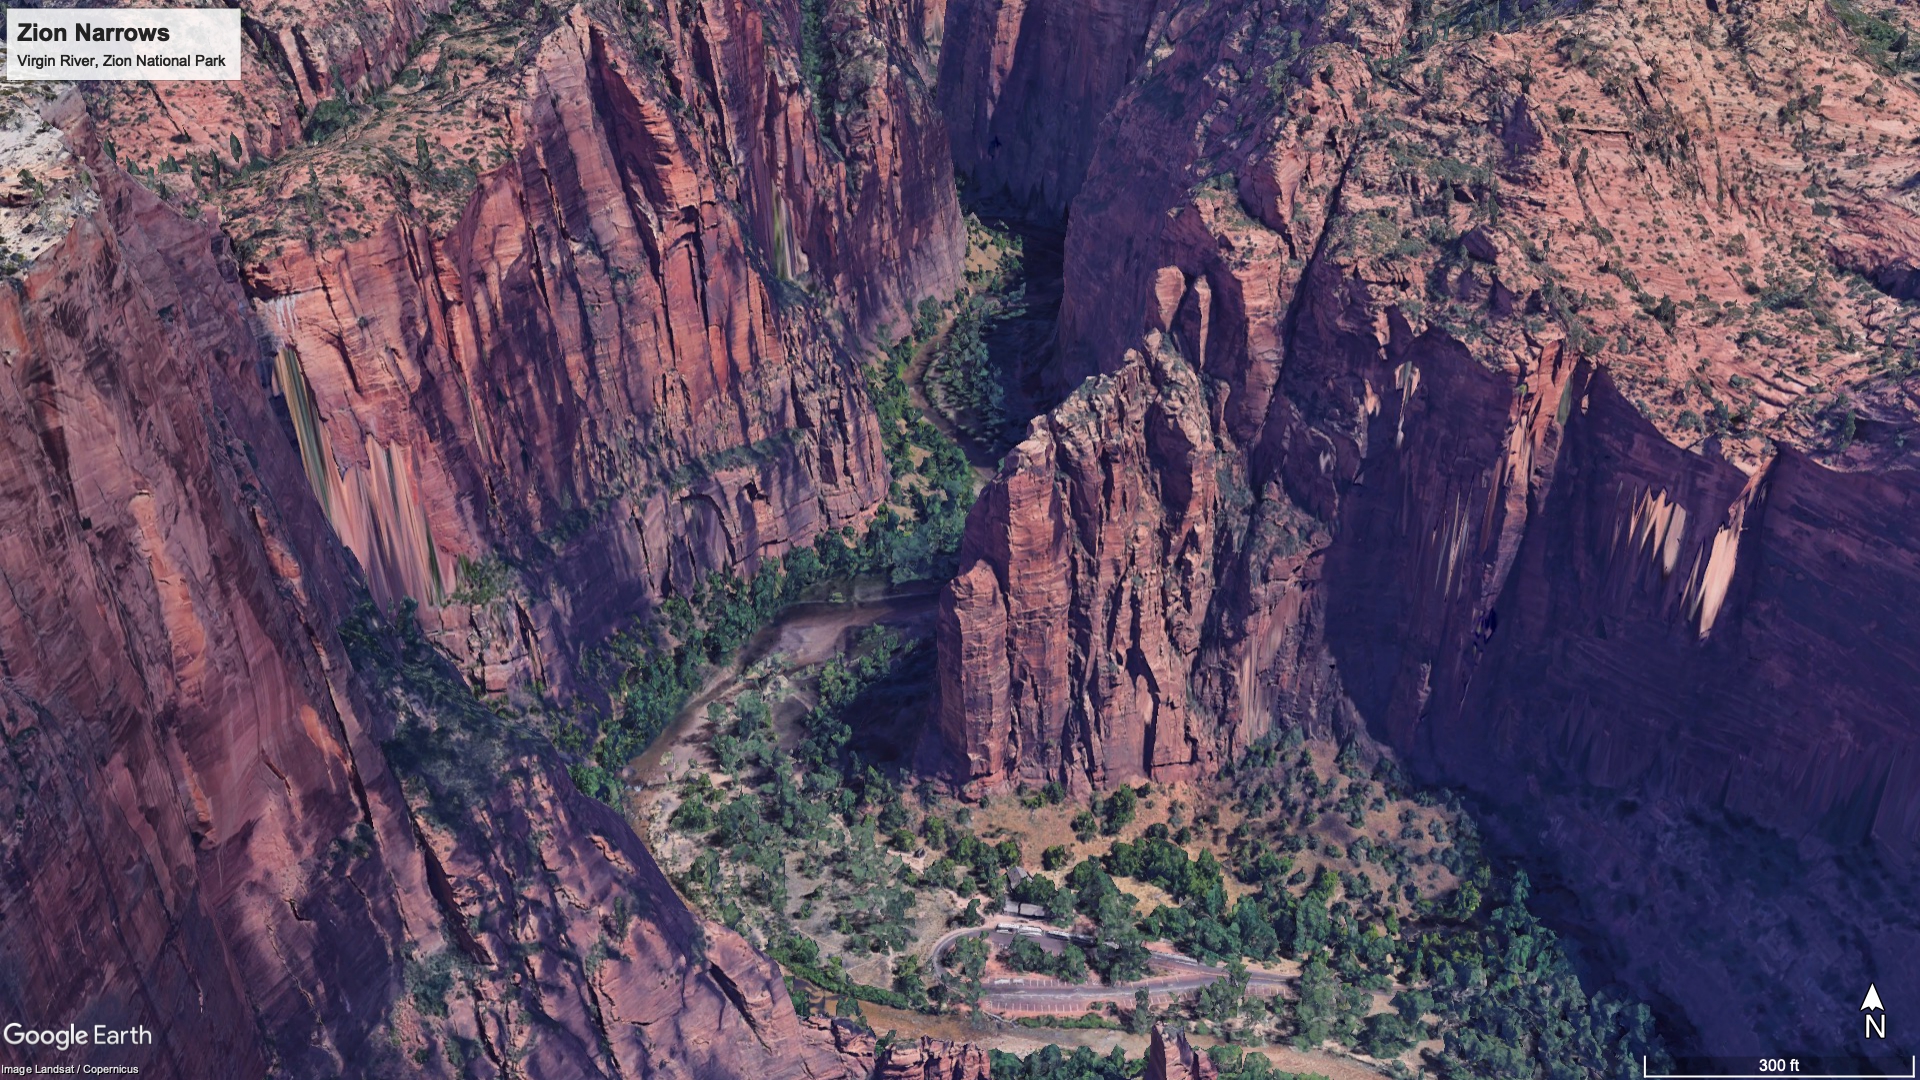 The Virgin River flows through the Zion Narrows in Zion National Park (Google Earth Pro)...